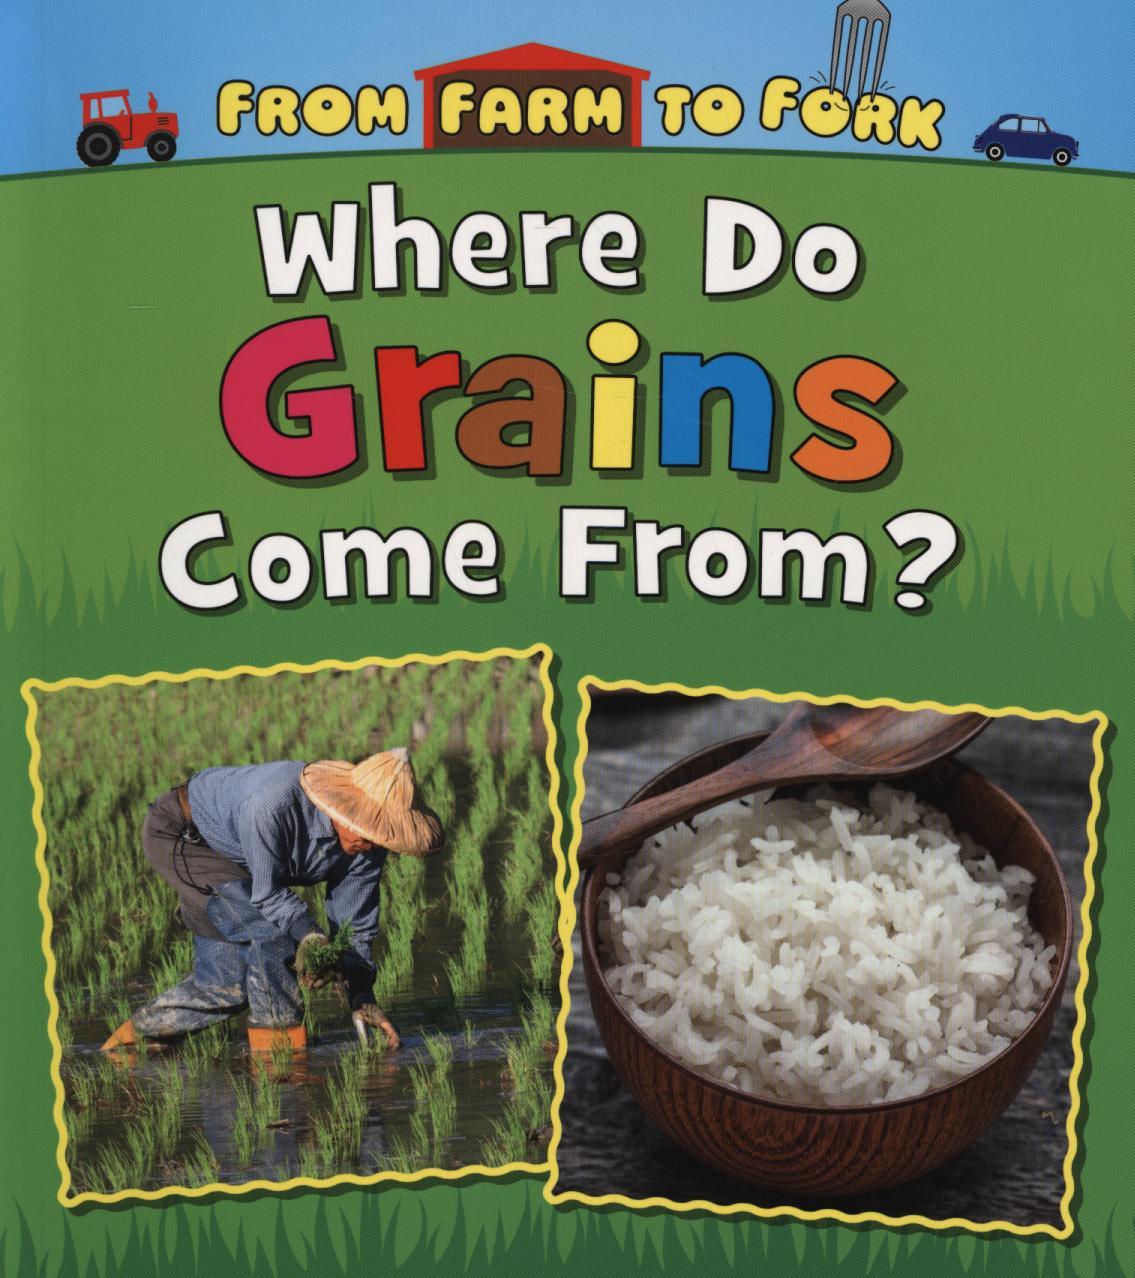 Where Do Grains Come From? - Linda Staniford